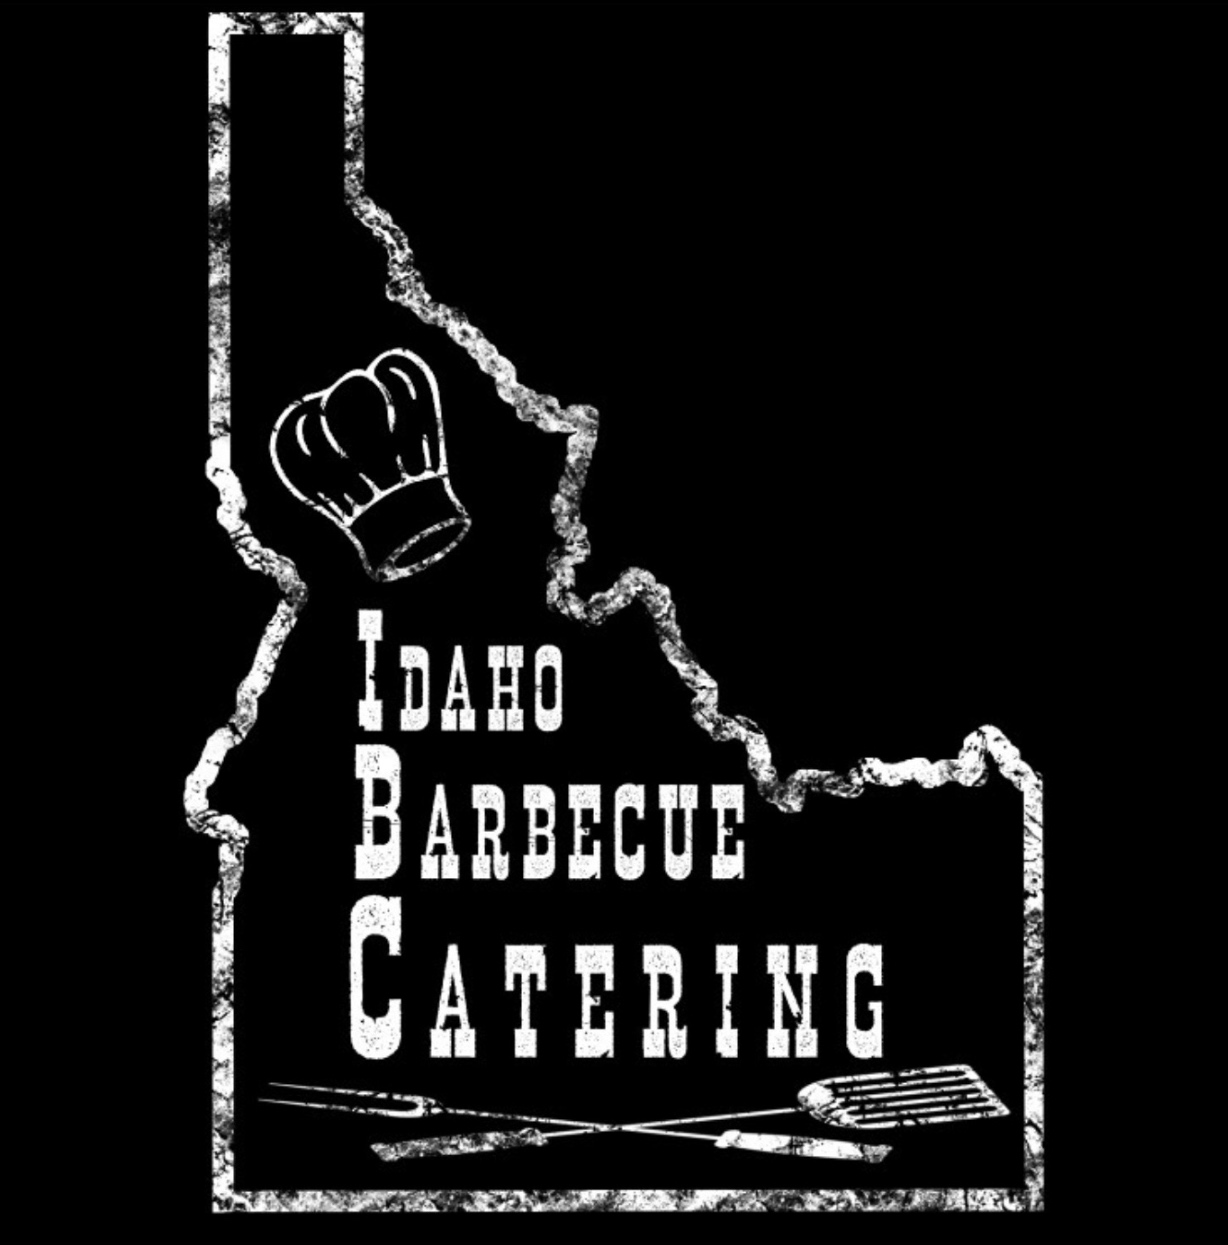 Idaho Barbecue Catering